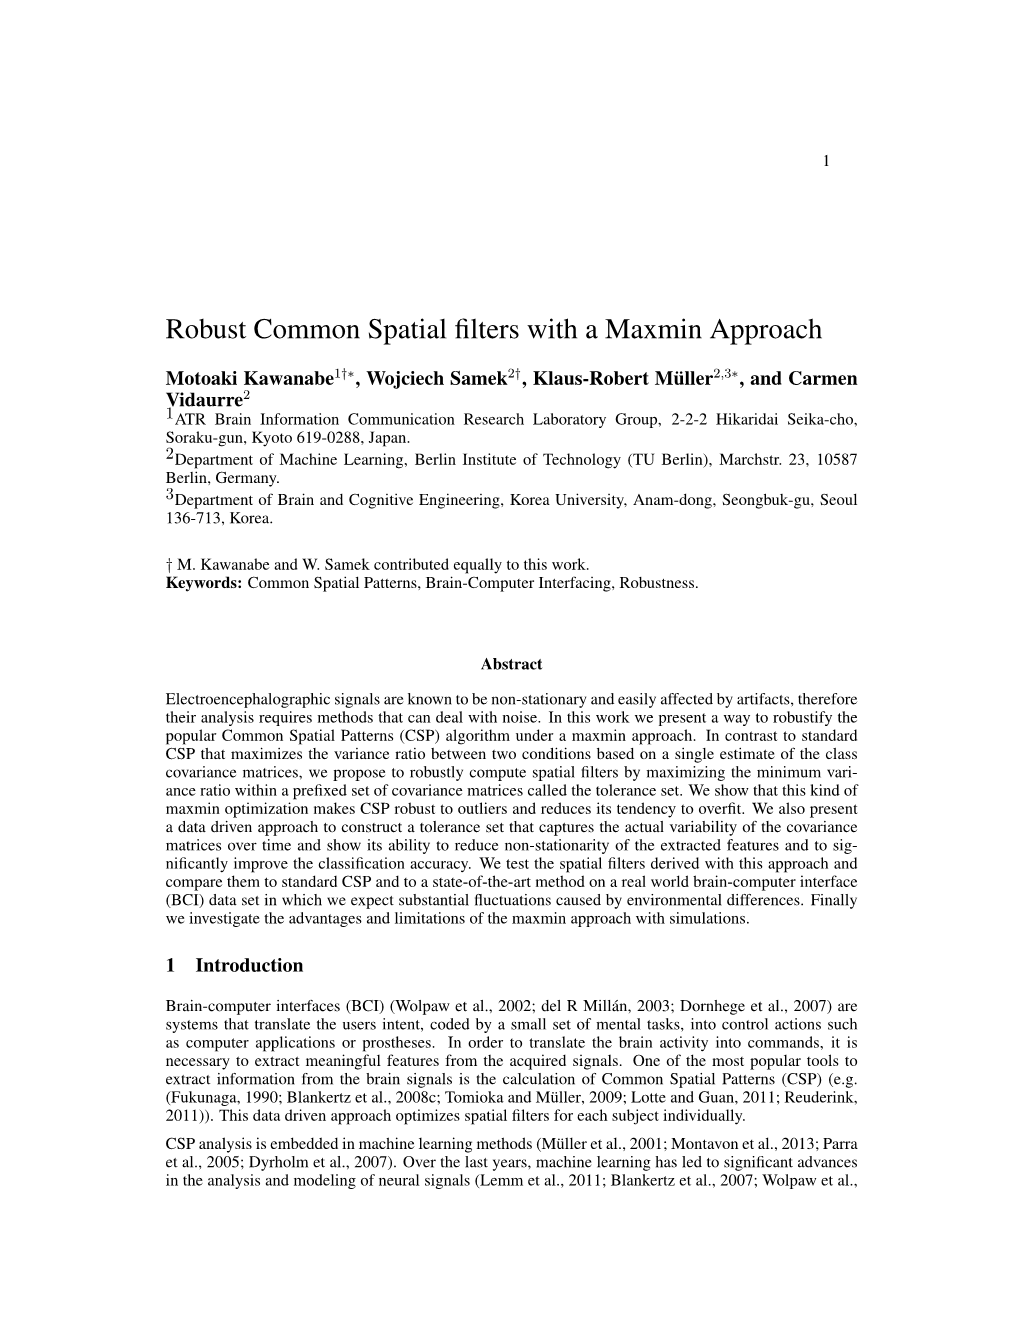 Robust Common Spatial Filters with a Maxmin Approach